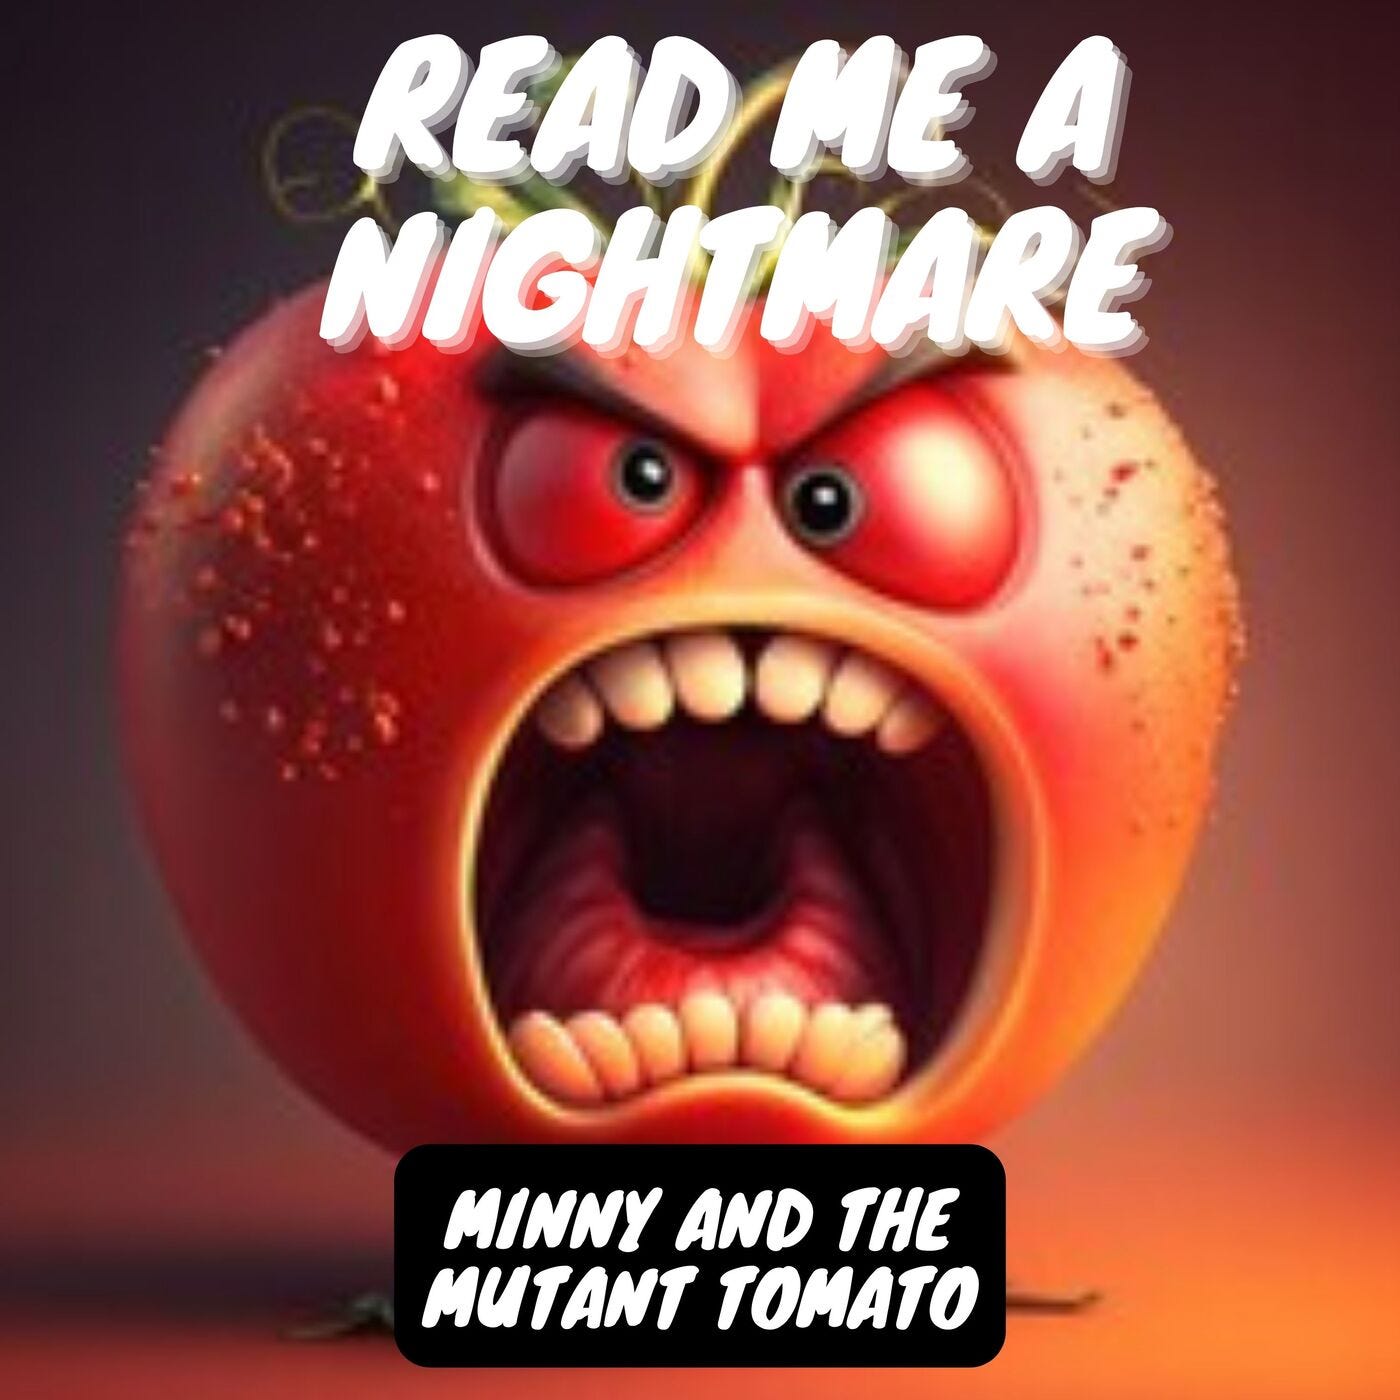 40 Minny and the Mutant Tomato